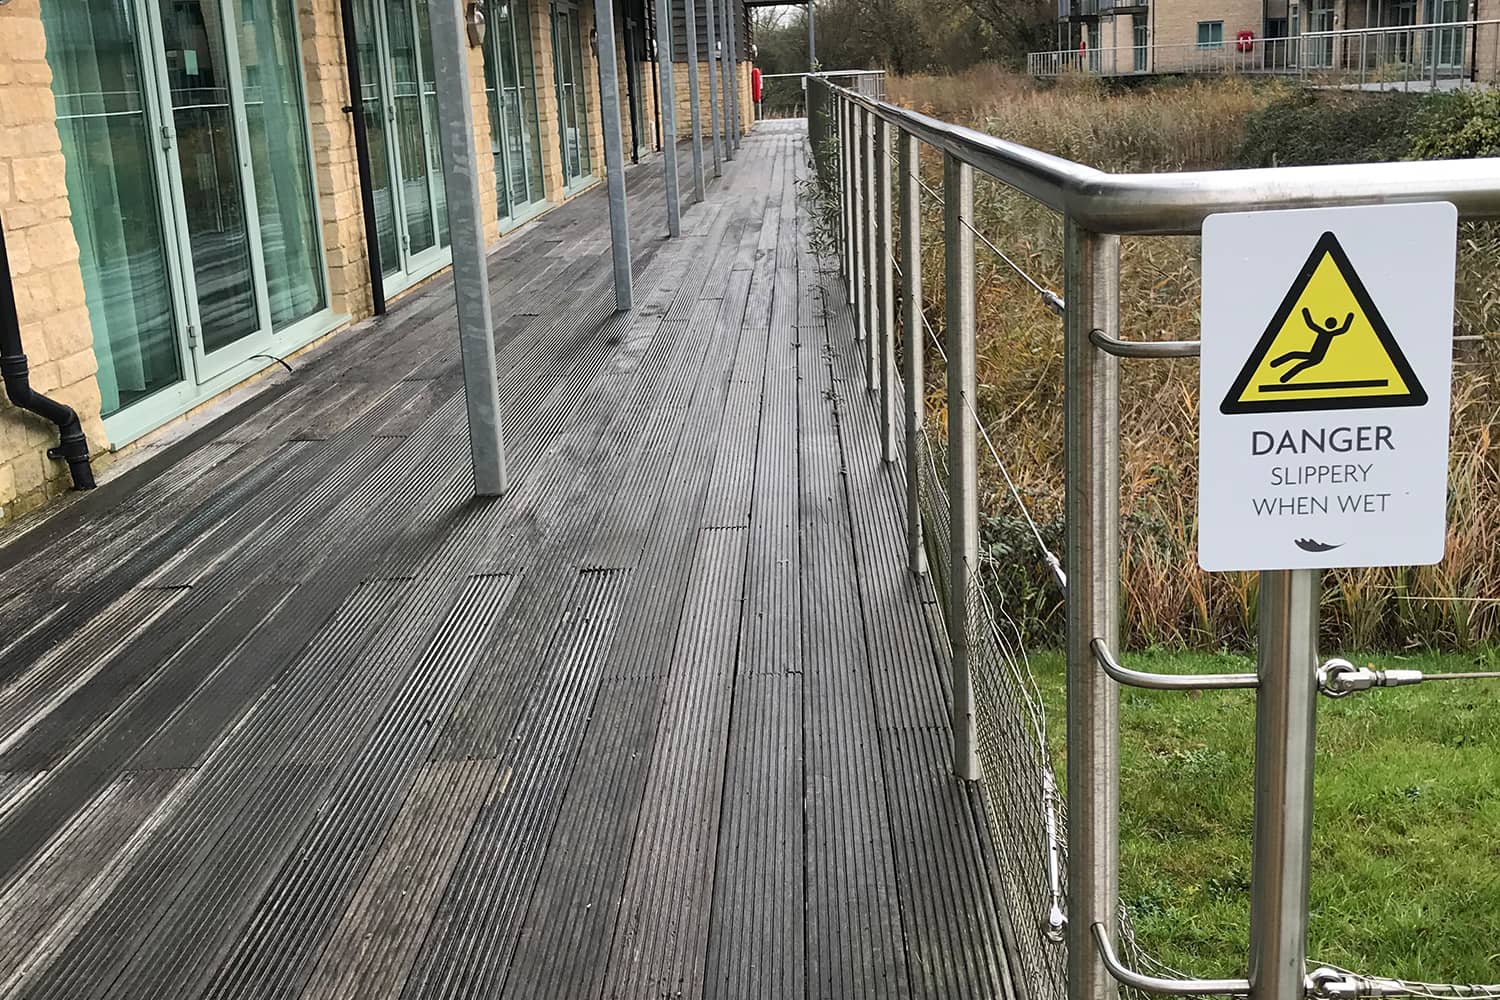 Danger sign next to slippery timber decking on hotel grounds